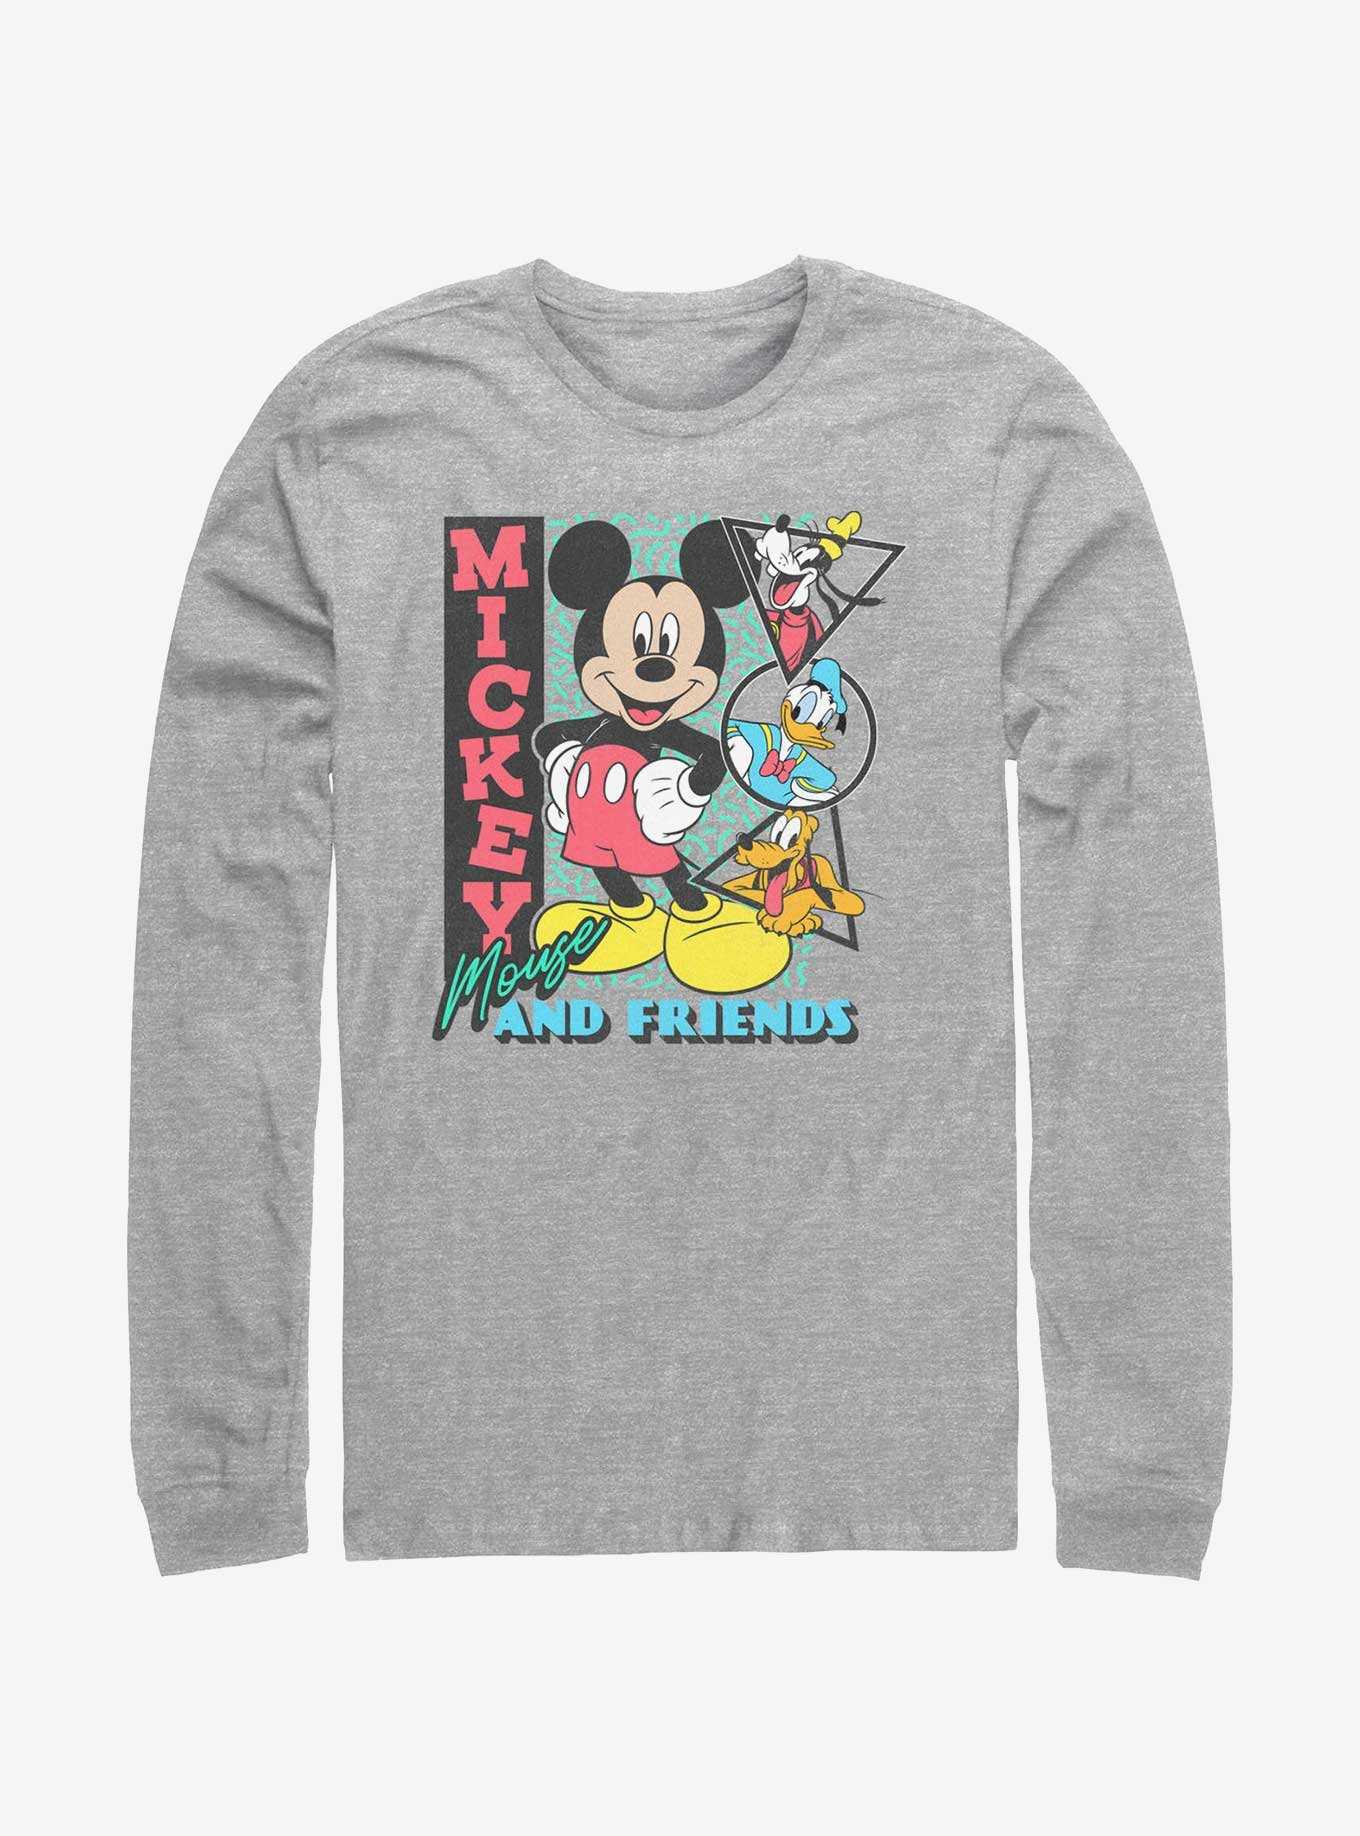 Disney Mickey Mouse Friends Goofy Donald and Pluto Long-Sleeve T-Shirt, , hi-res